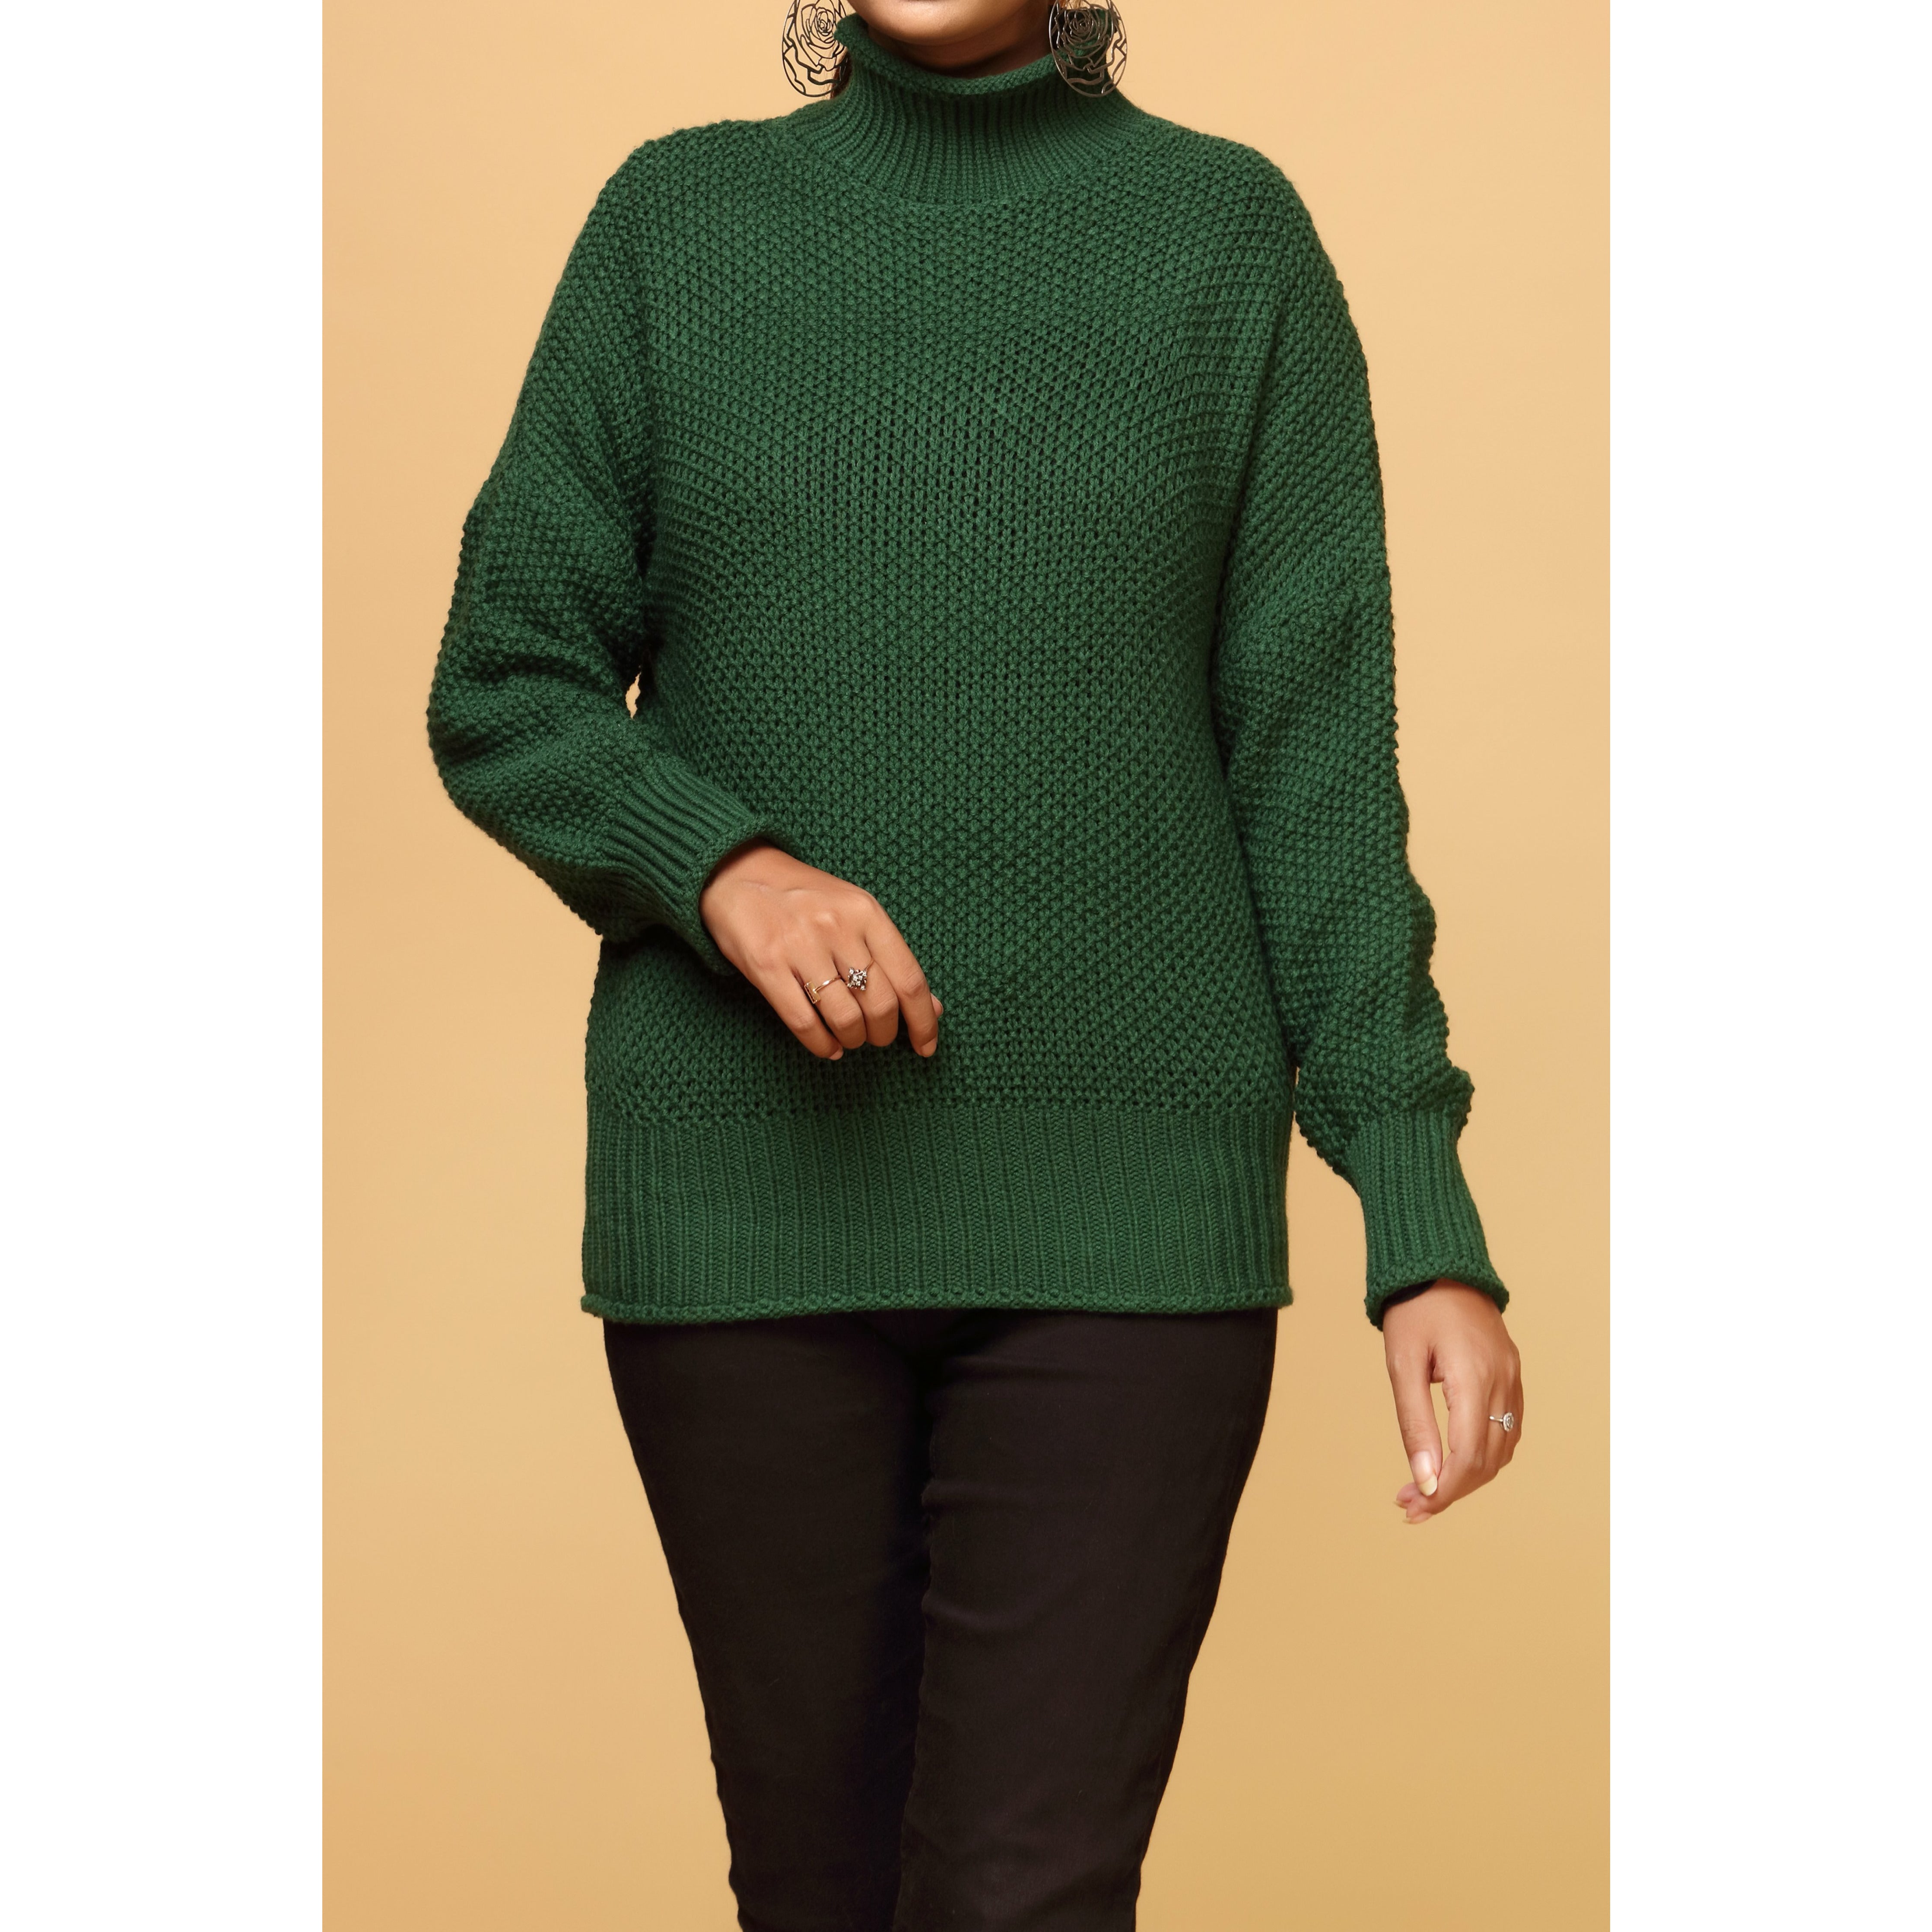 Green Color High Neck Sweater PW1905